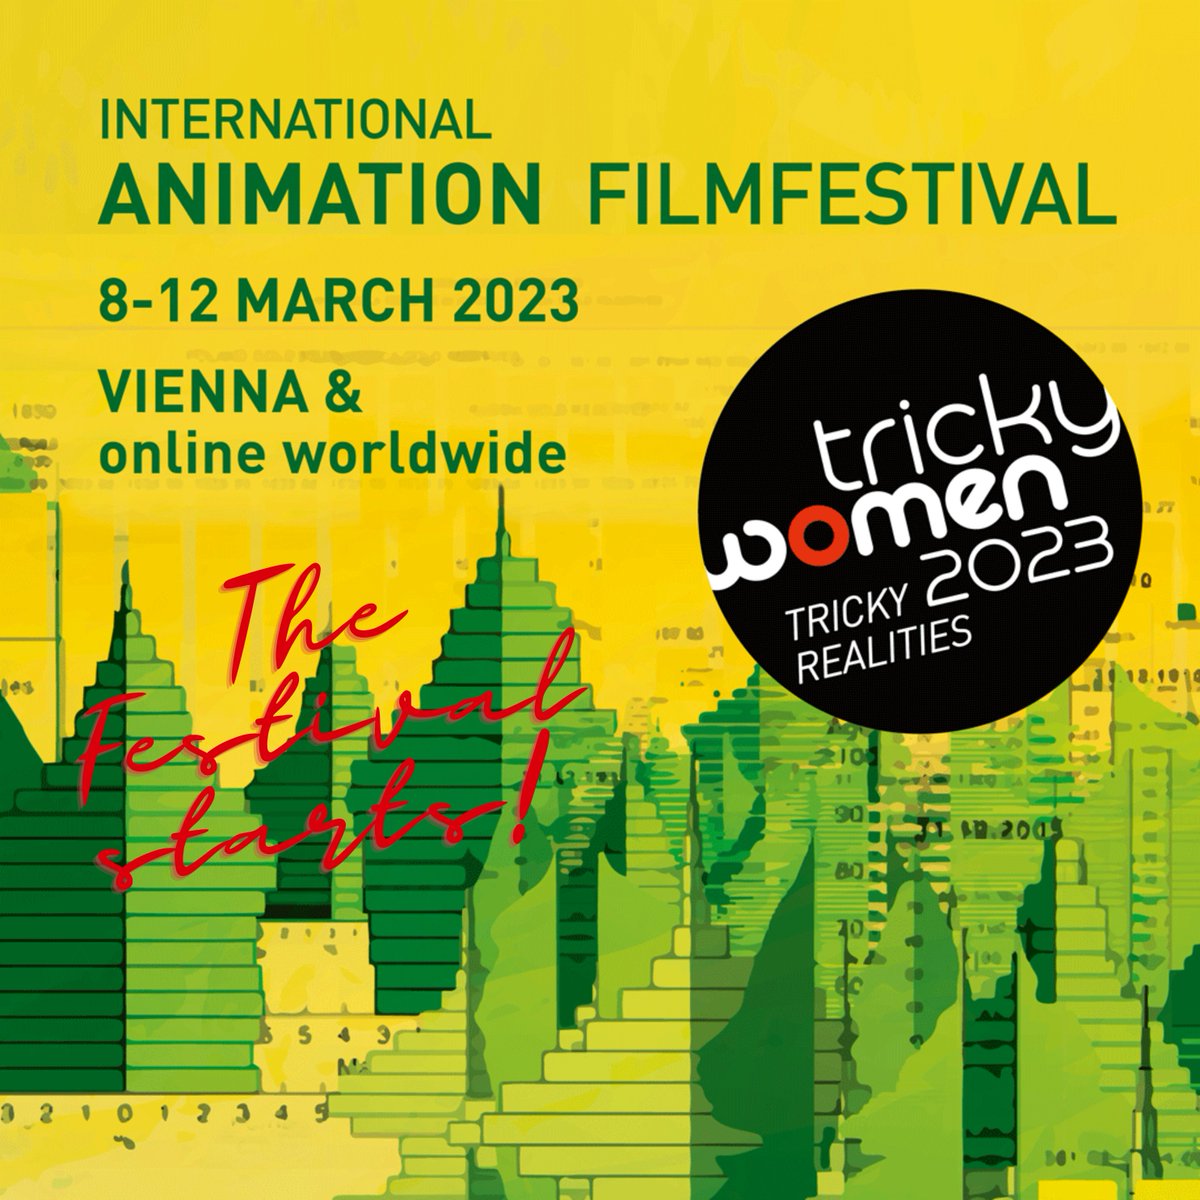 #twtr23 😍 Tricky Women/Tricky Realities 2023 starts today. During the next days we celebrate the radiance, courage and emancipatory power of animated films made by women and/or genderqueer artists in Vienna and online worldwide. More here: online.trickywomen.at